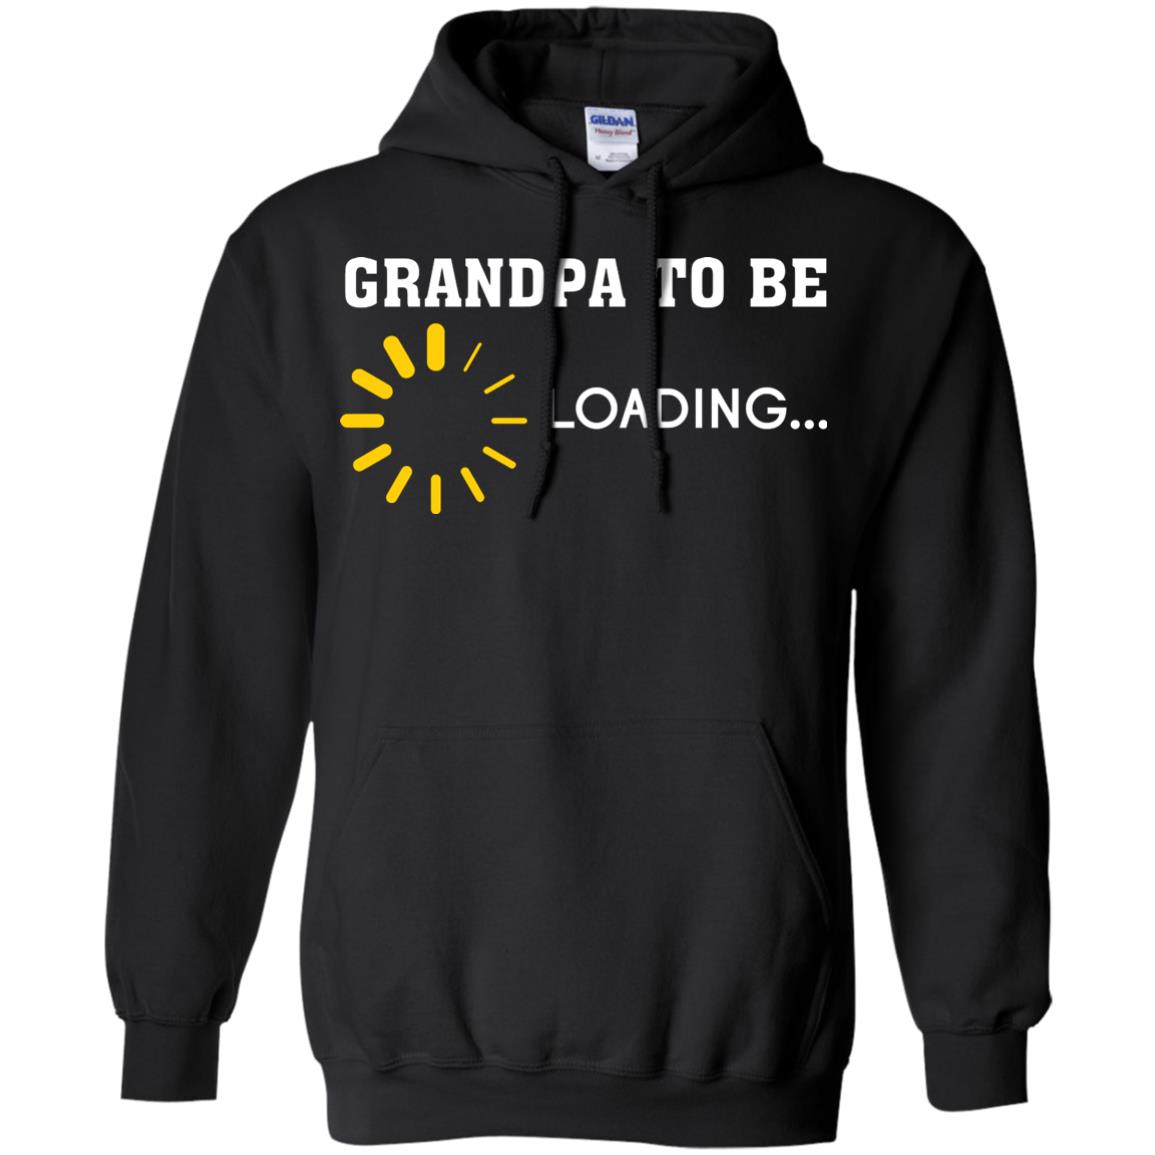 Grandpa To Be Loading Announcement Gift Shirt For Papa